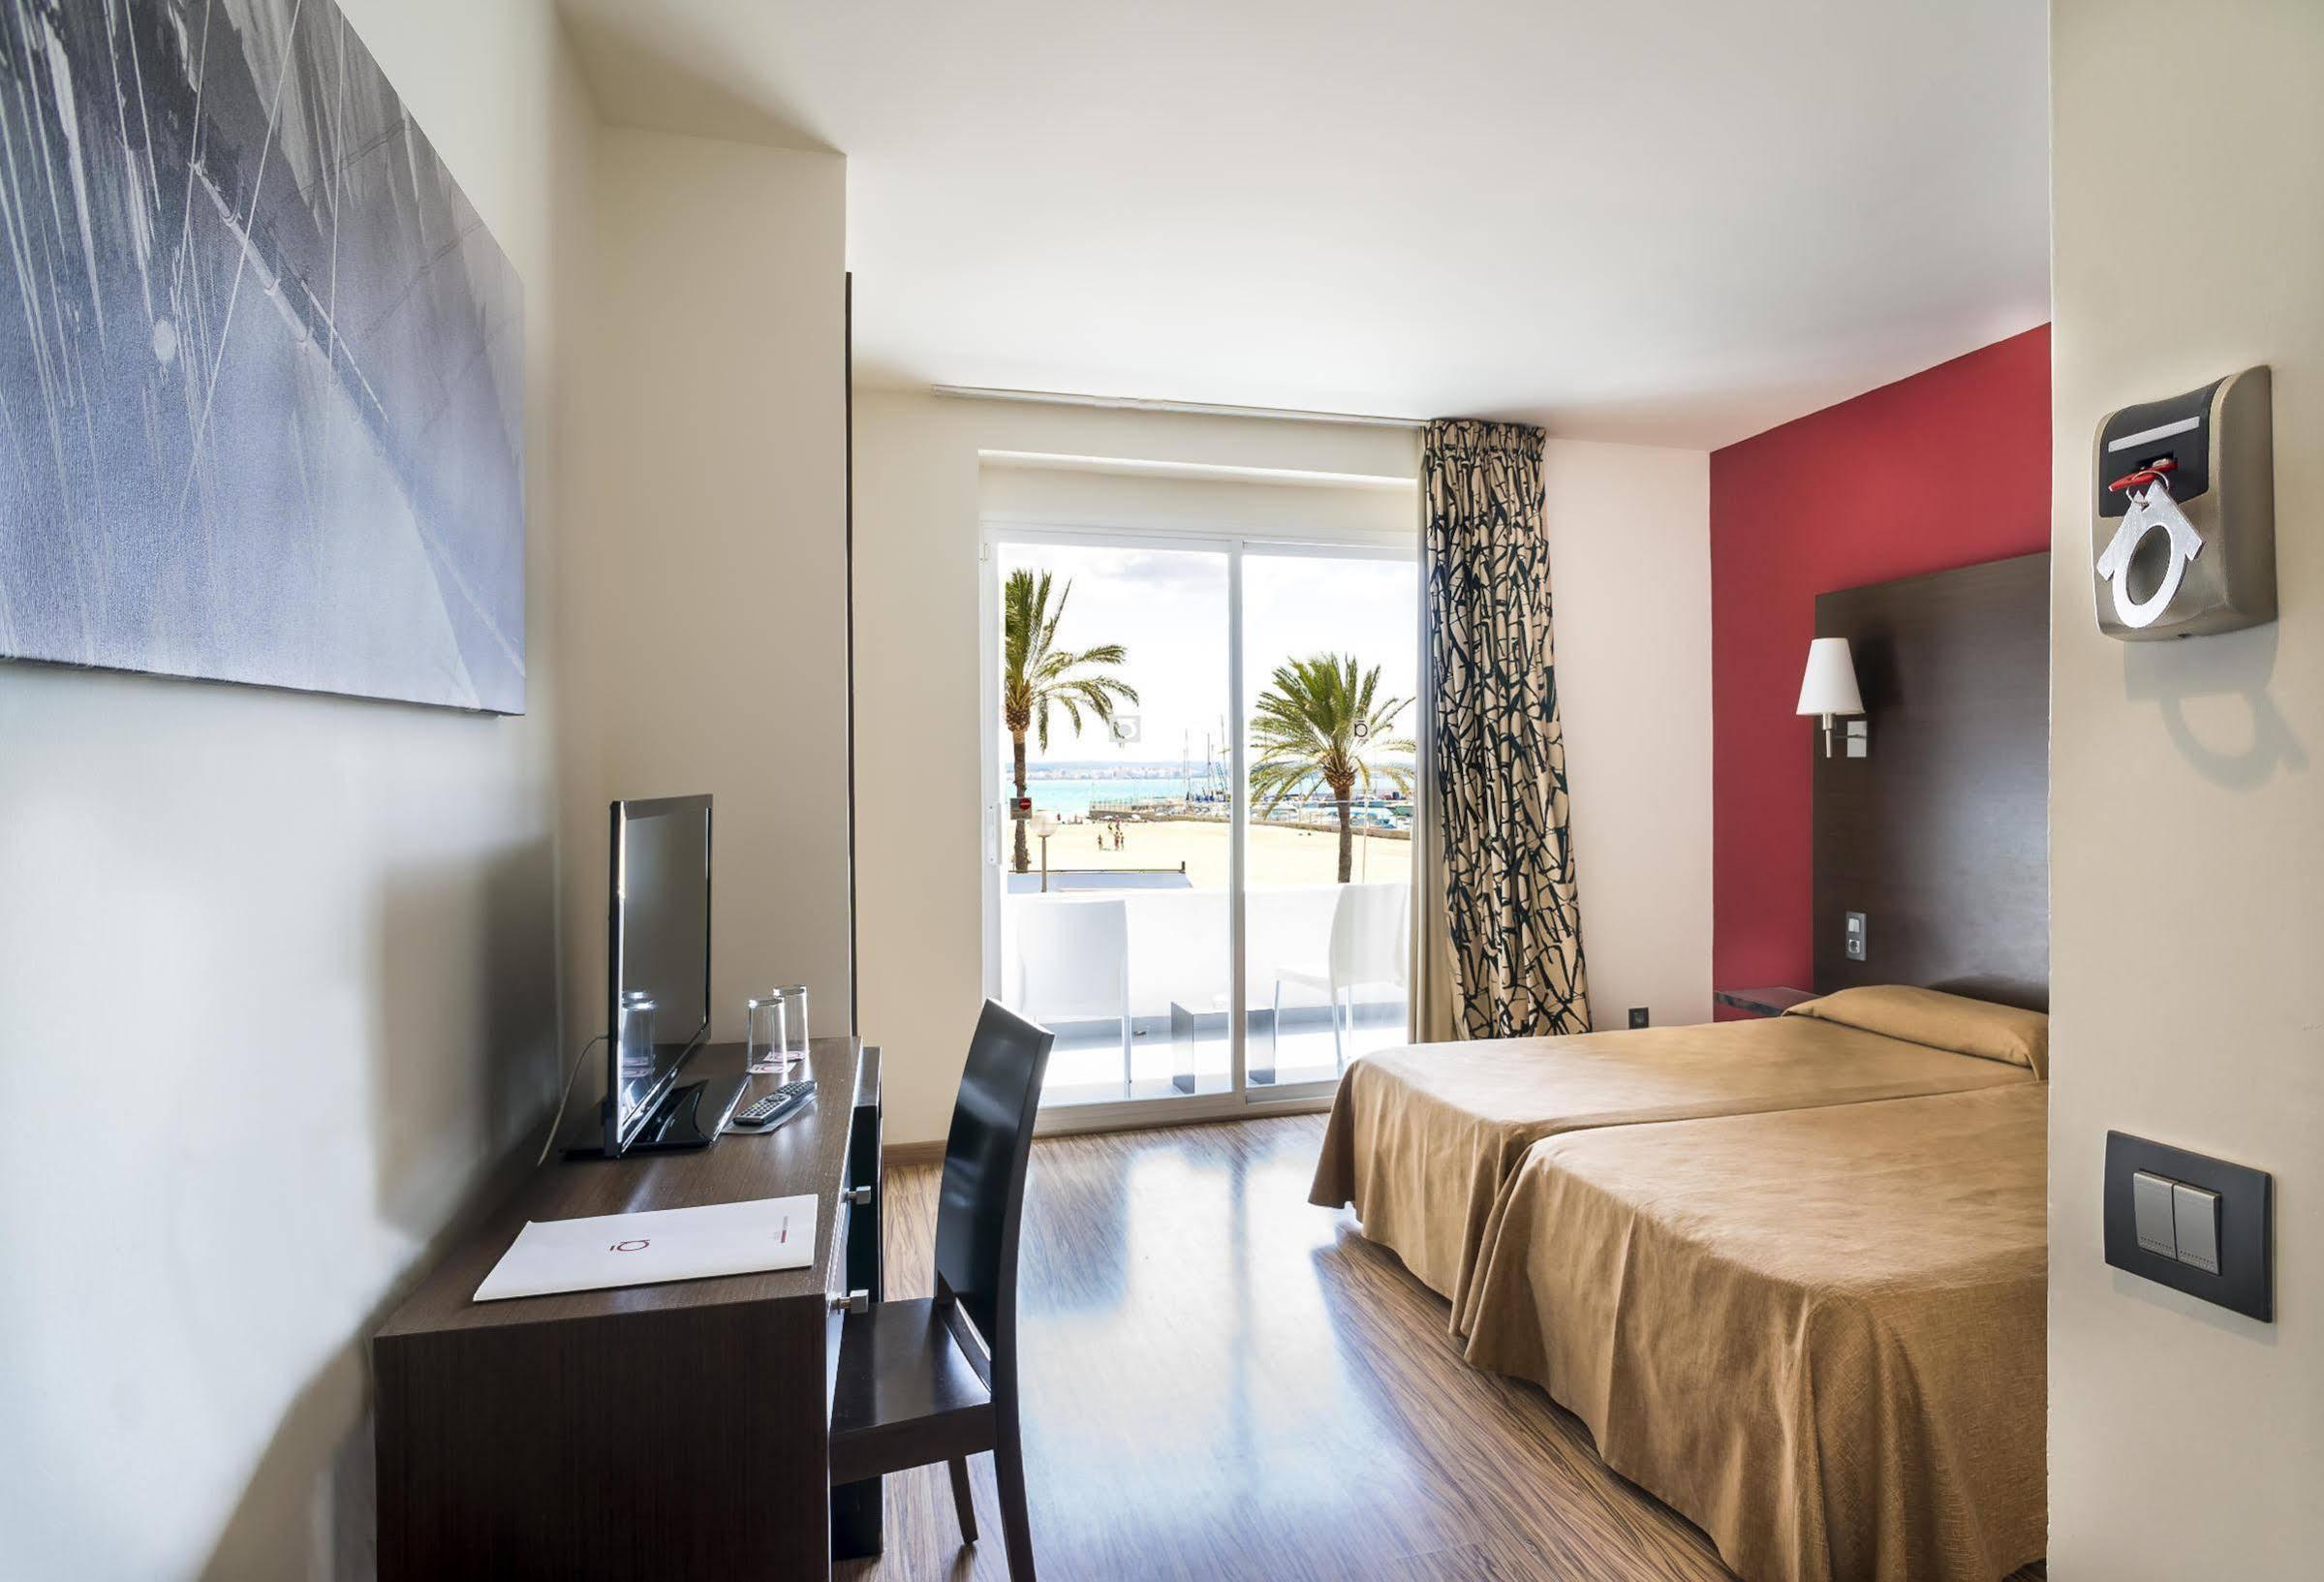 Nautic Hotel & Spa-Can Pastilla Updated 2022 Room Price-Reviews & Deals |  Trip.com